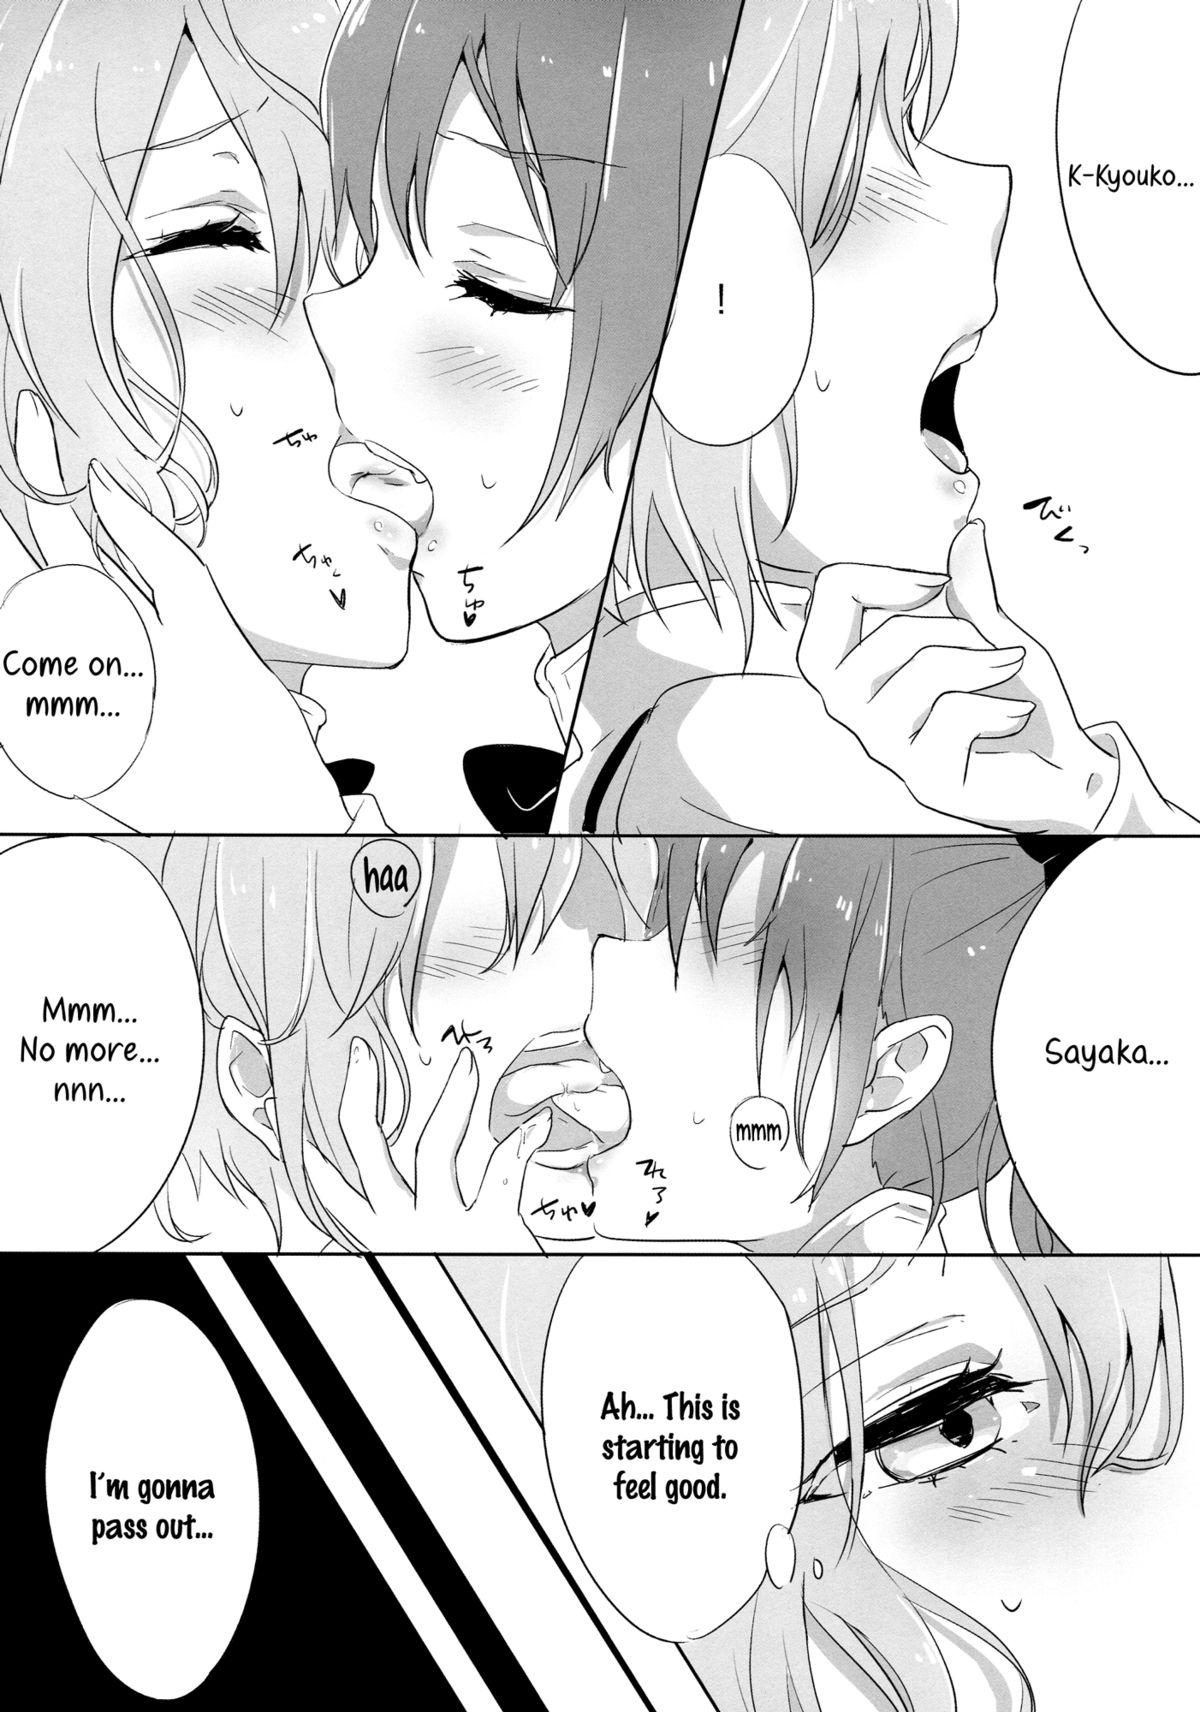 Free Blowjobs How is condition? - Puella magi madoka magica Money - Page 4